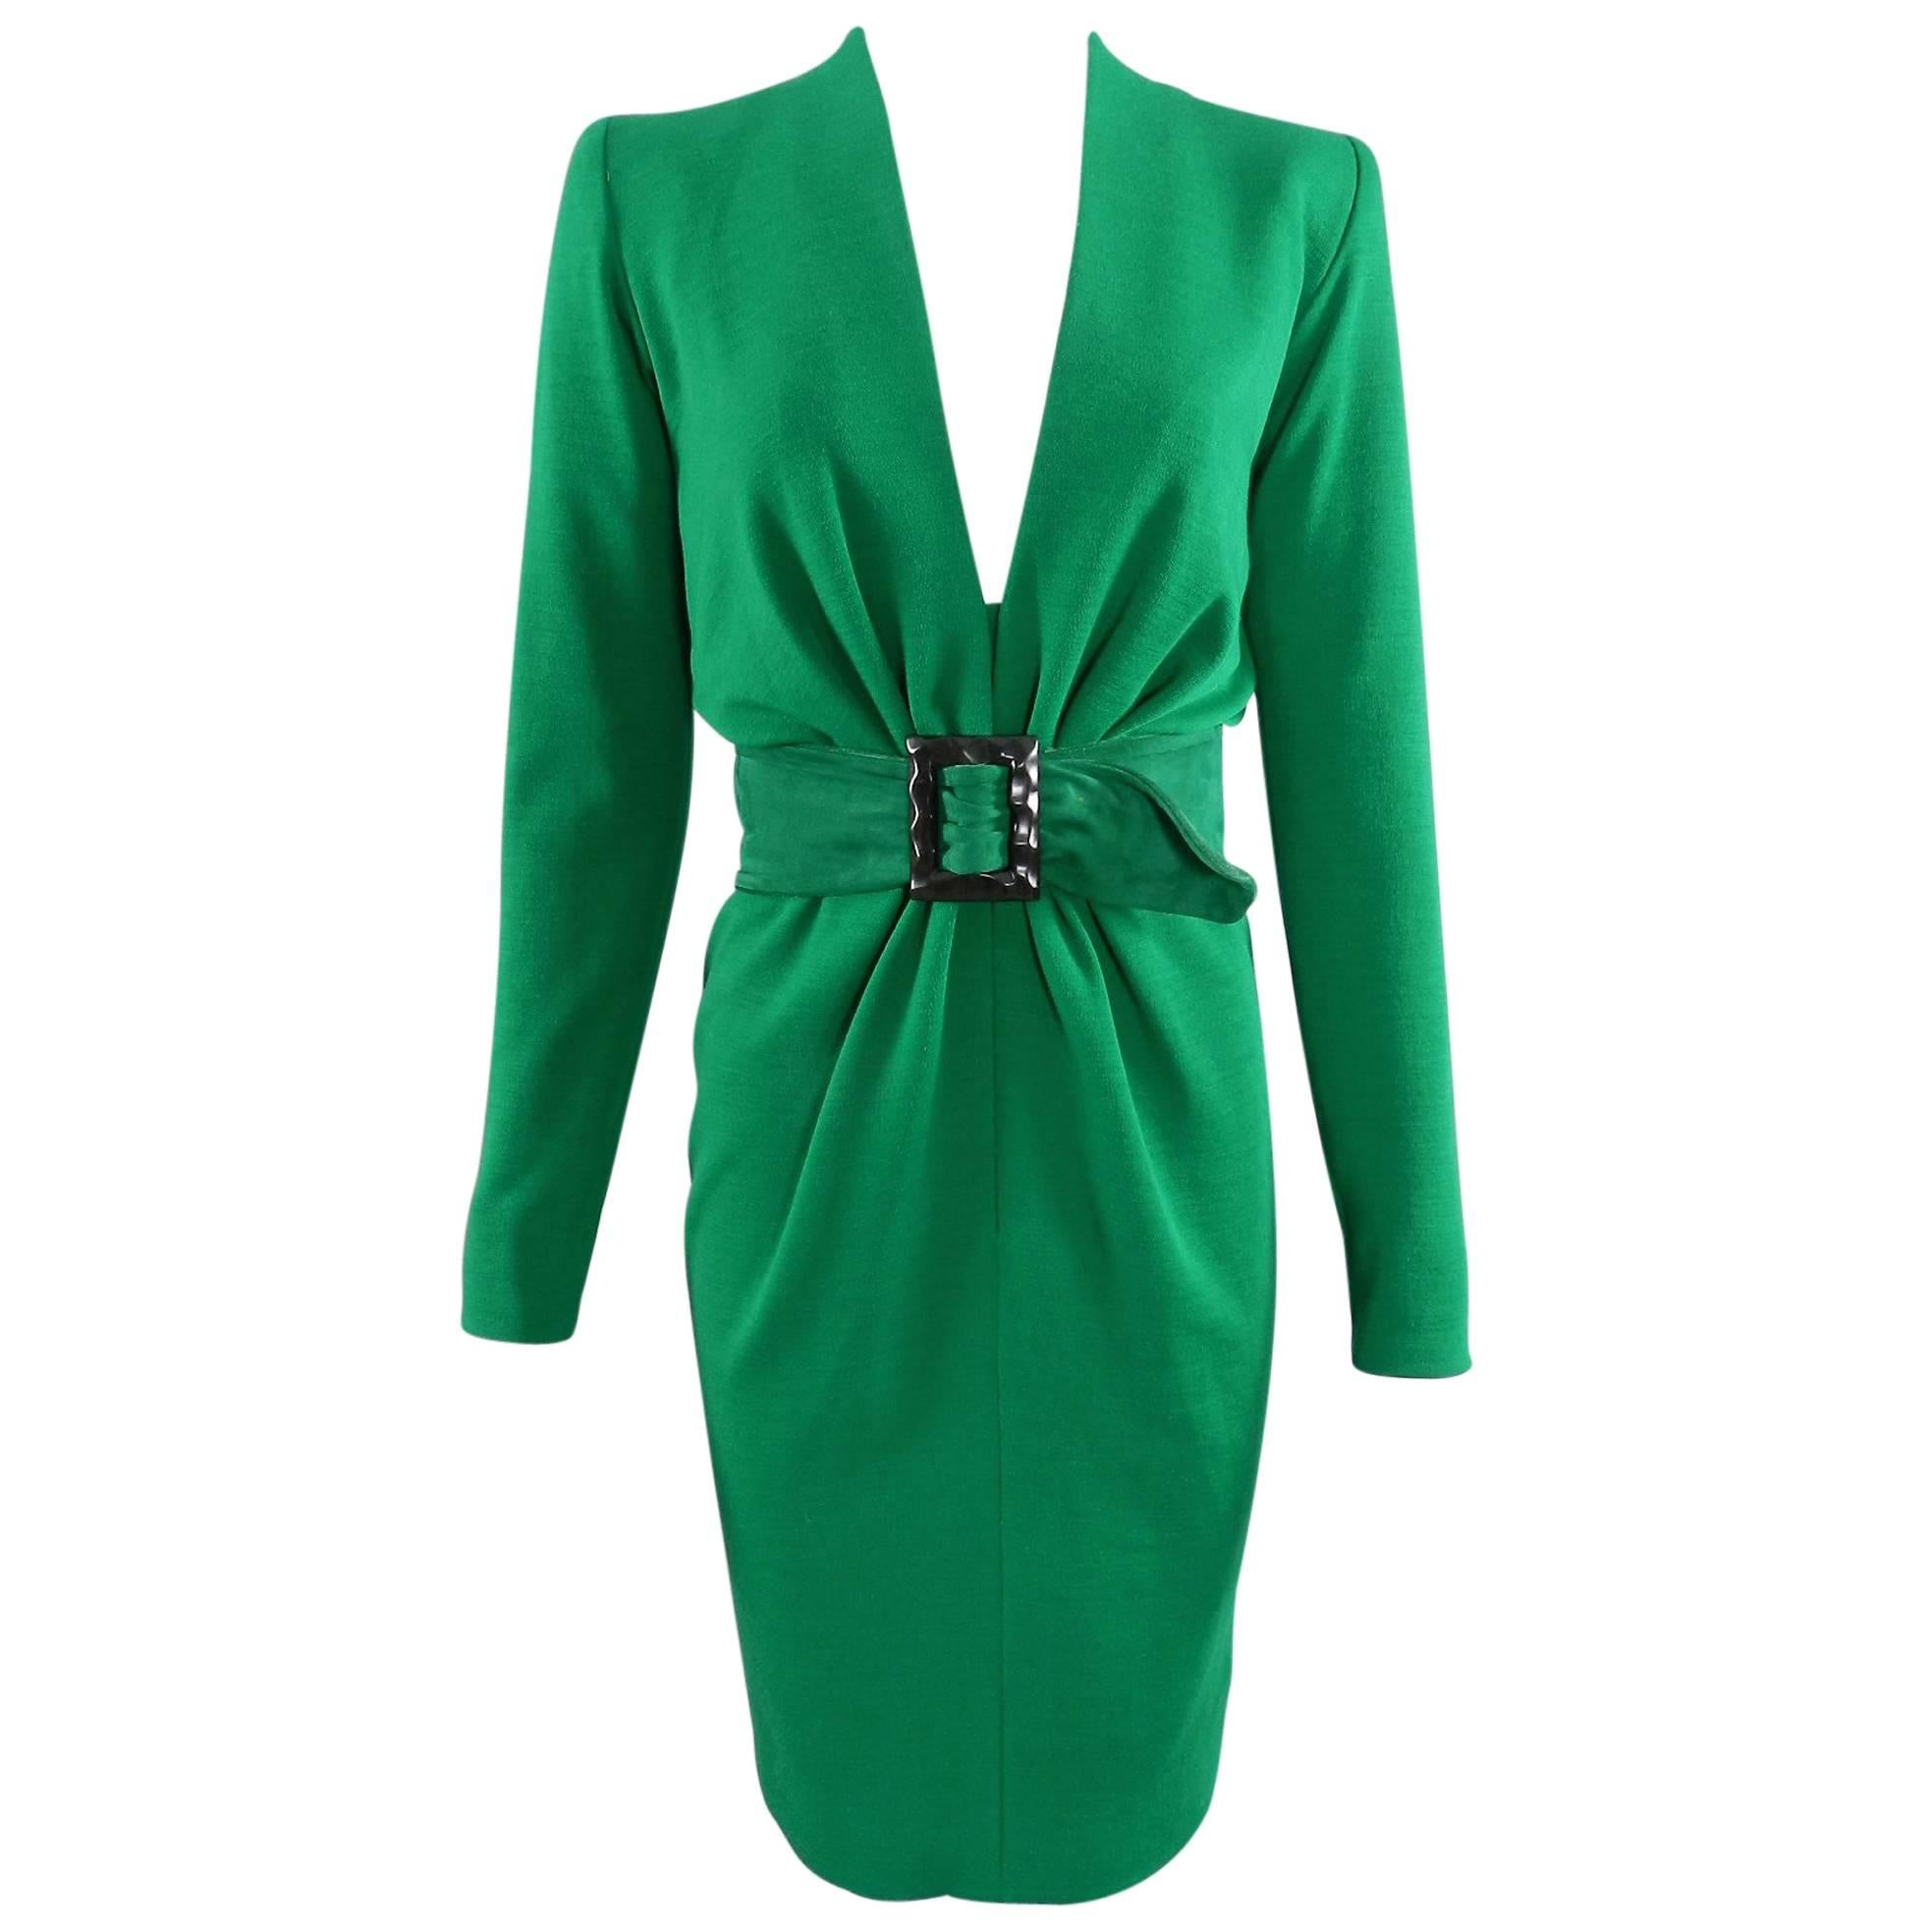 YSL Yves Saint Laurent Haute Couture Vintage 1990's Green Wool Knit Jersey Dress